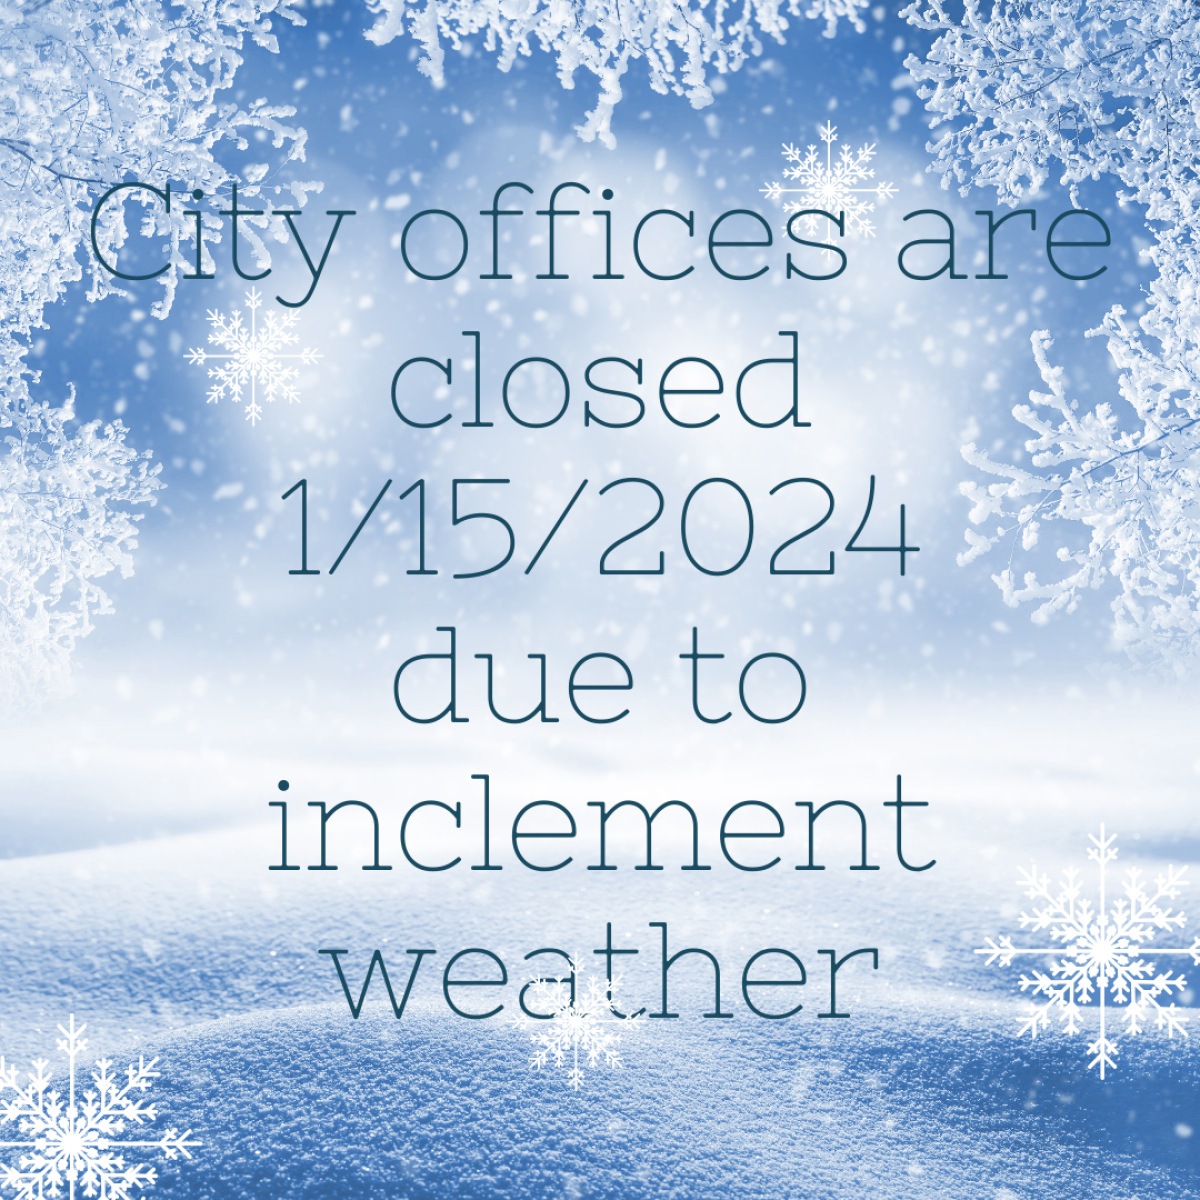 City Hall closed 1/15/2024 due to inclement weather